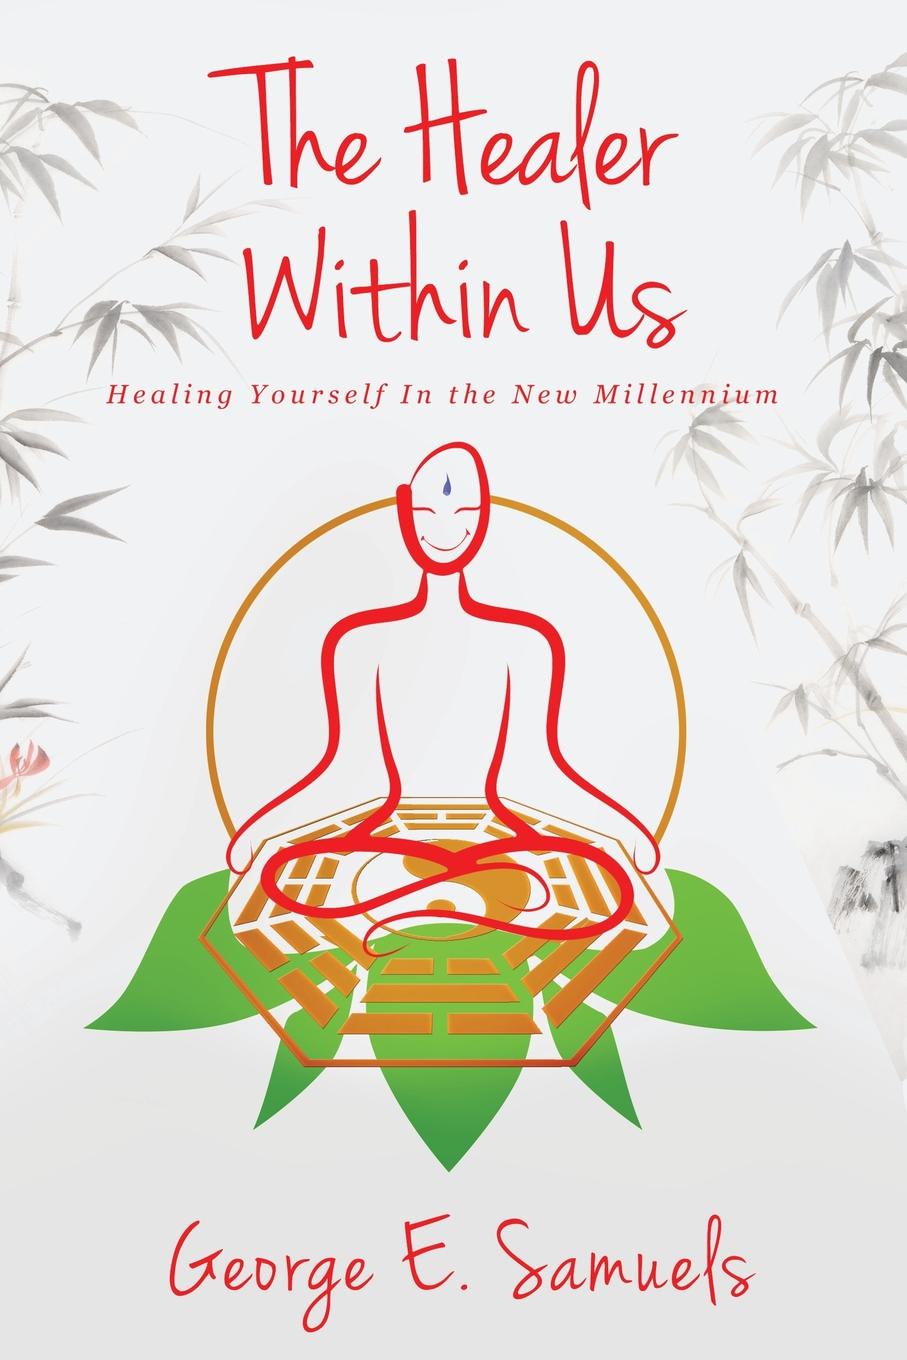 The Healer Within Us. Healing Yourself In the New Millennium